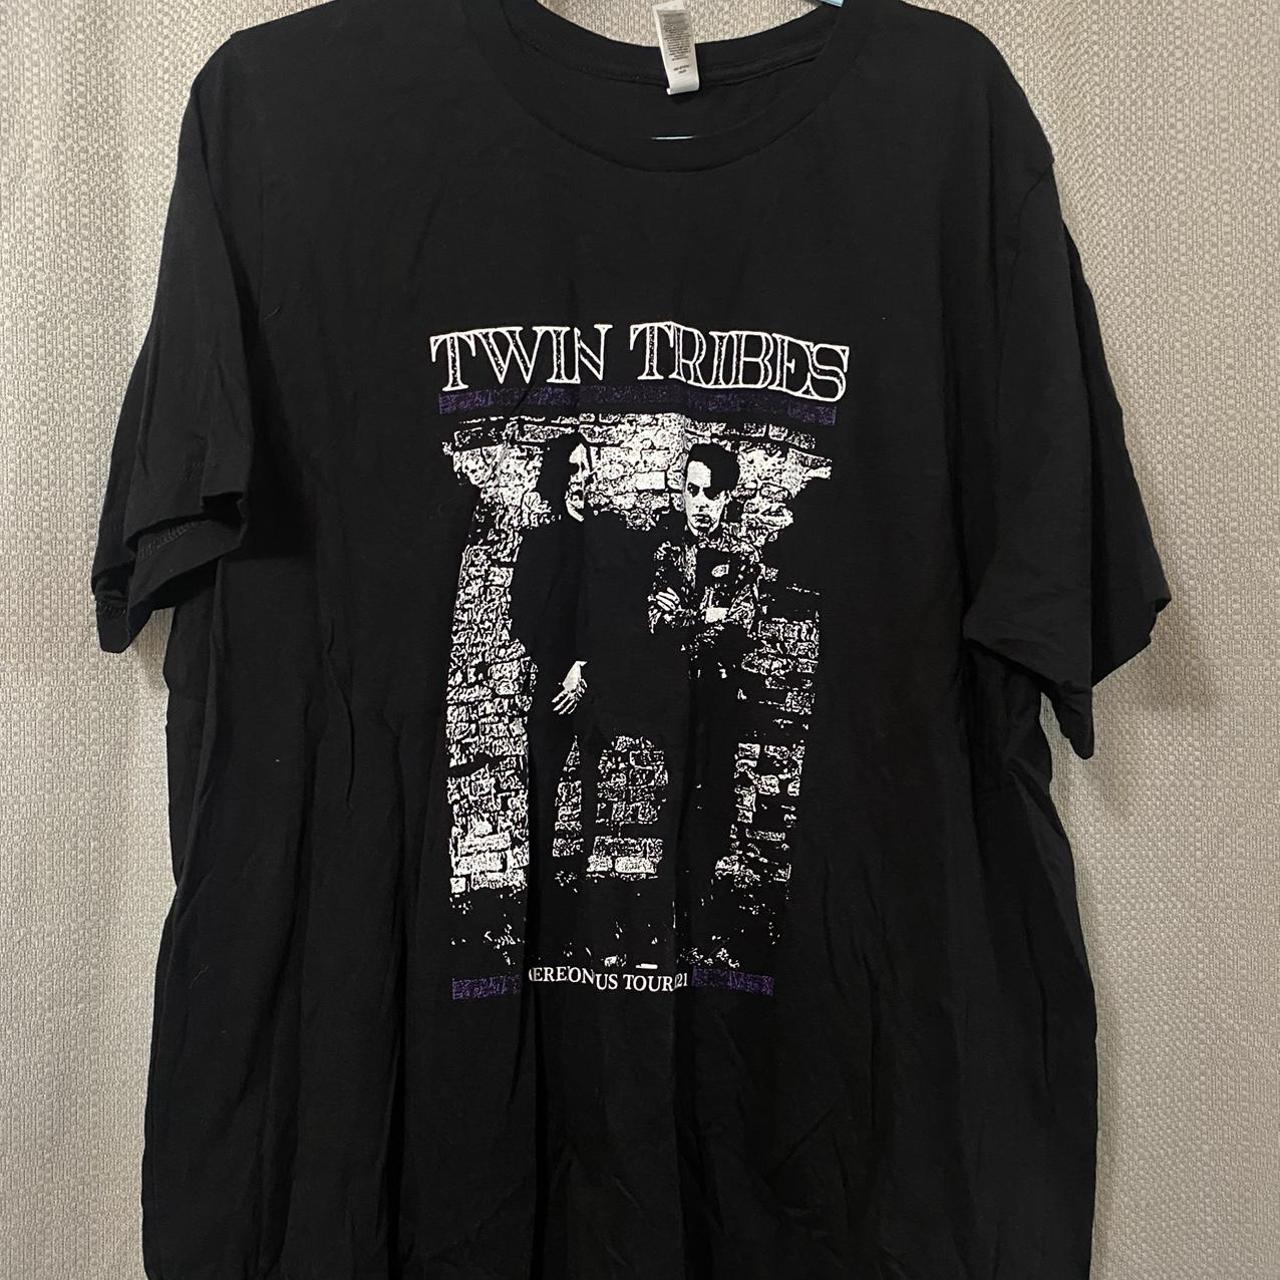 TWIN TRIBES 2021 TOUR TEE SECOND PHOTO IS BACK.... - Depop